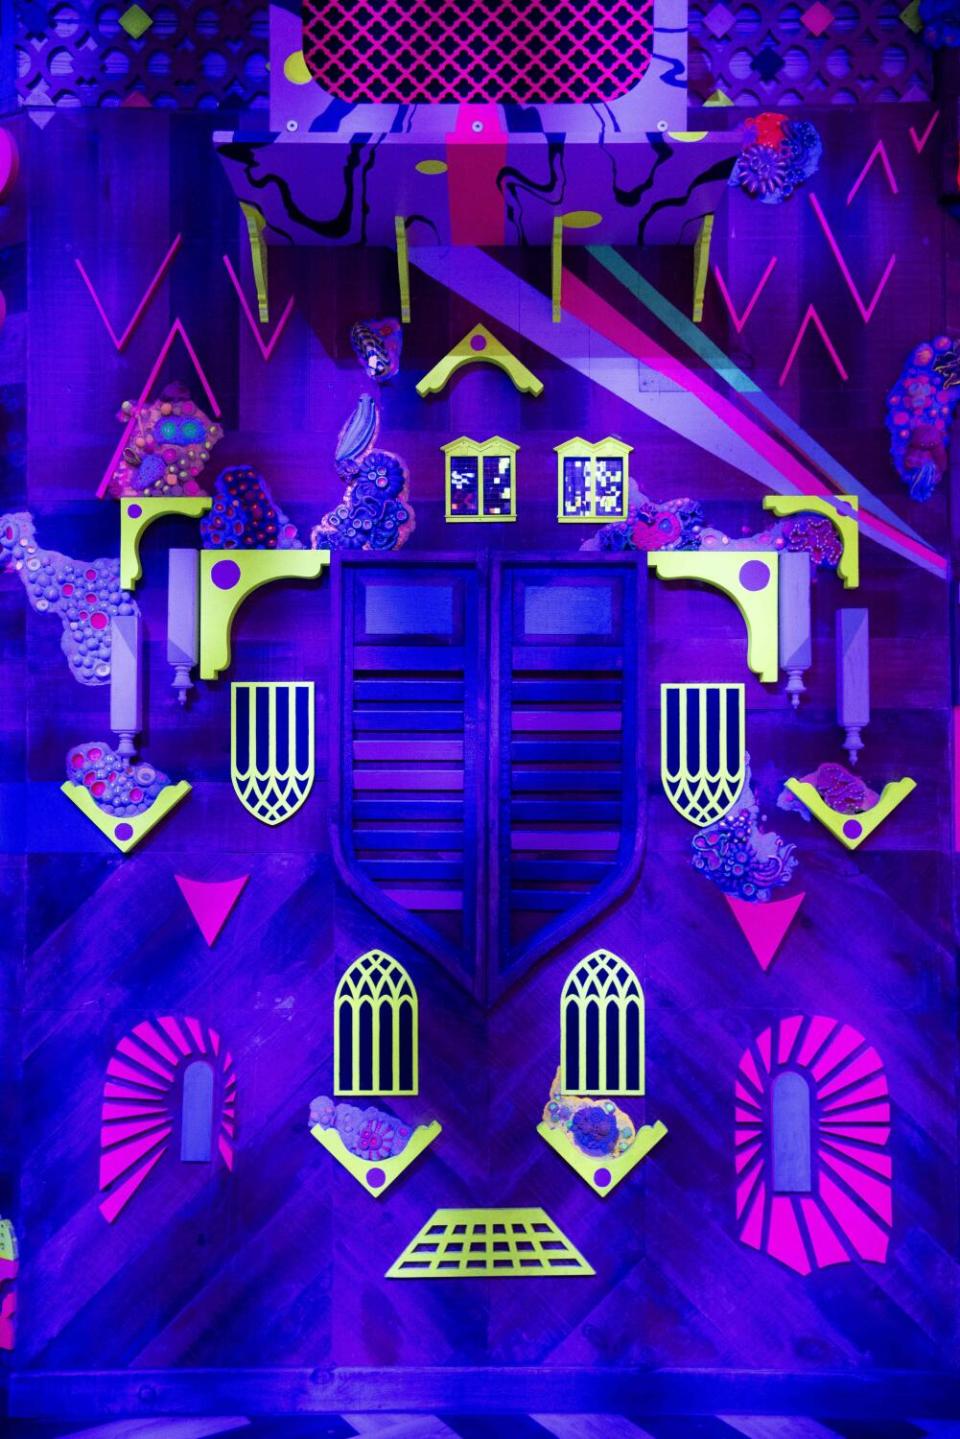 An area of Meow Wolf's Grapevine, Texas, exhibit is fashioned as a neon city.